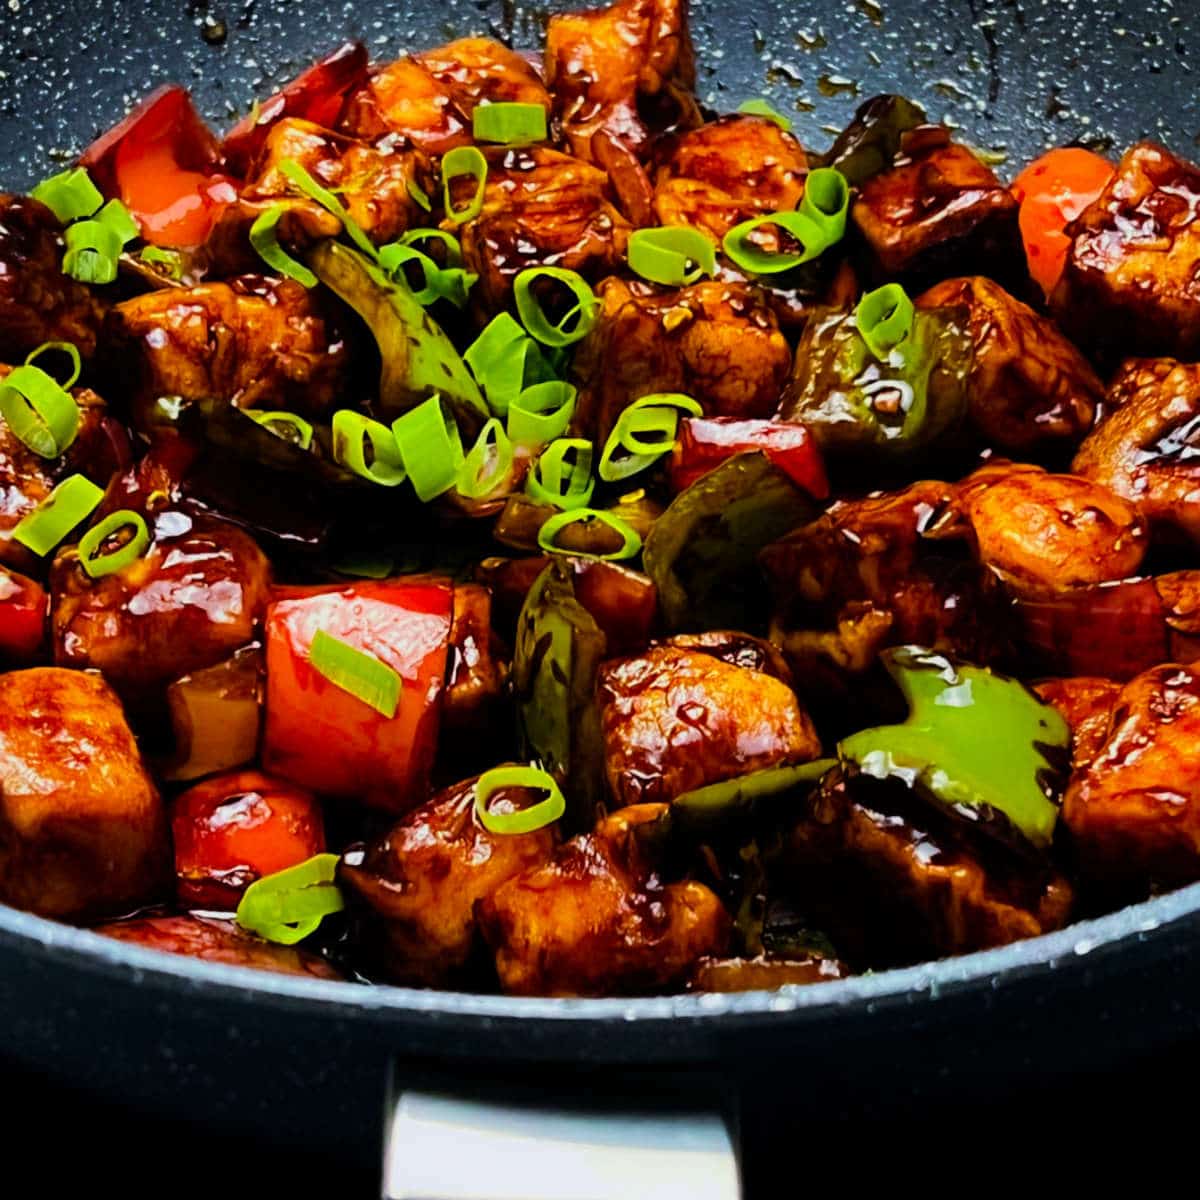 Step showing the mixing and tossing of chilli paneer in a frying pan.